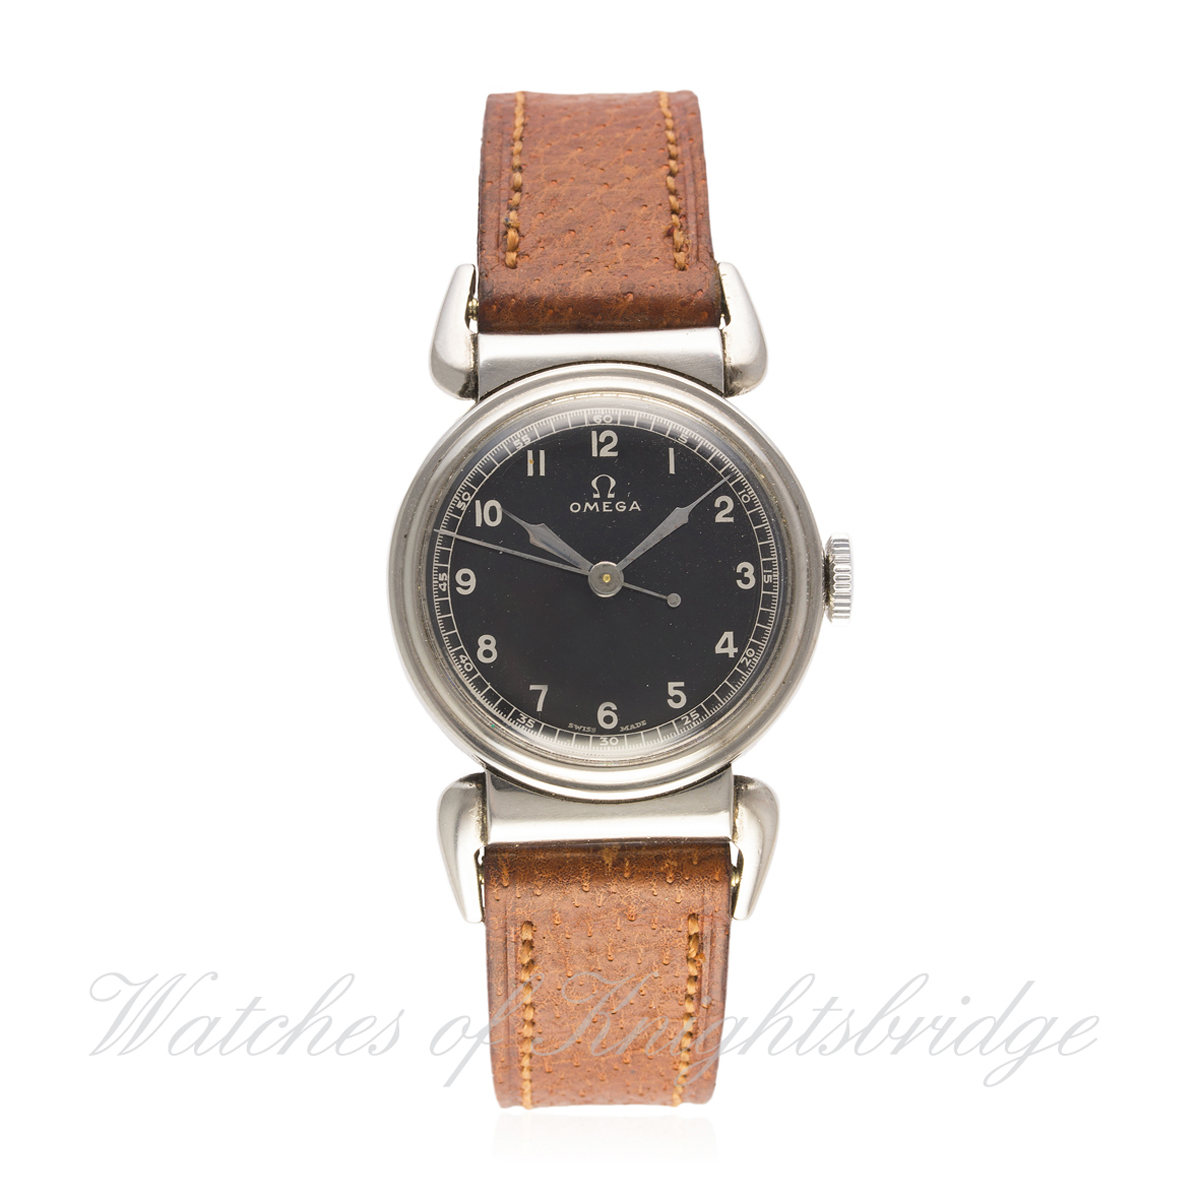 A RARE GENTLEMAN'S STAINLESS STEEL OMEGA WRIST WATCH CIRCA 1937, REF. 9372175
D: Black dial with